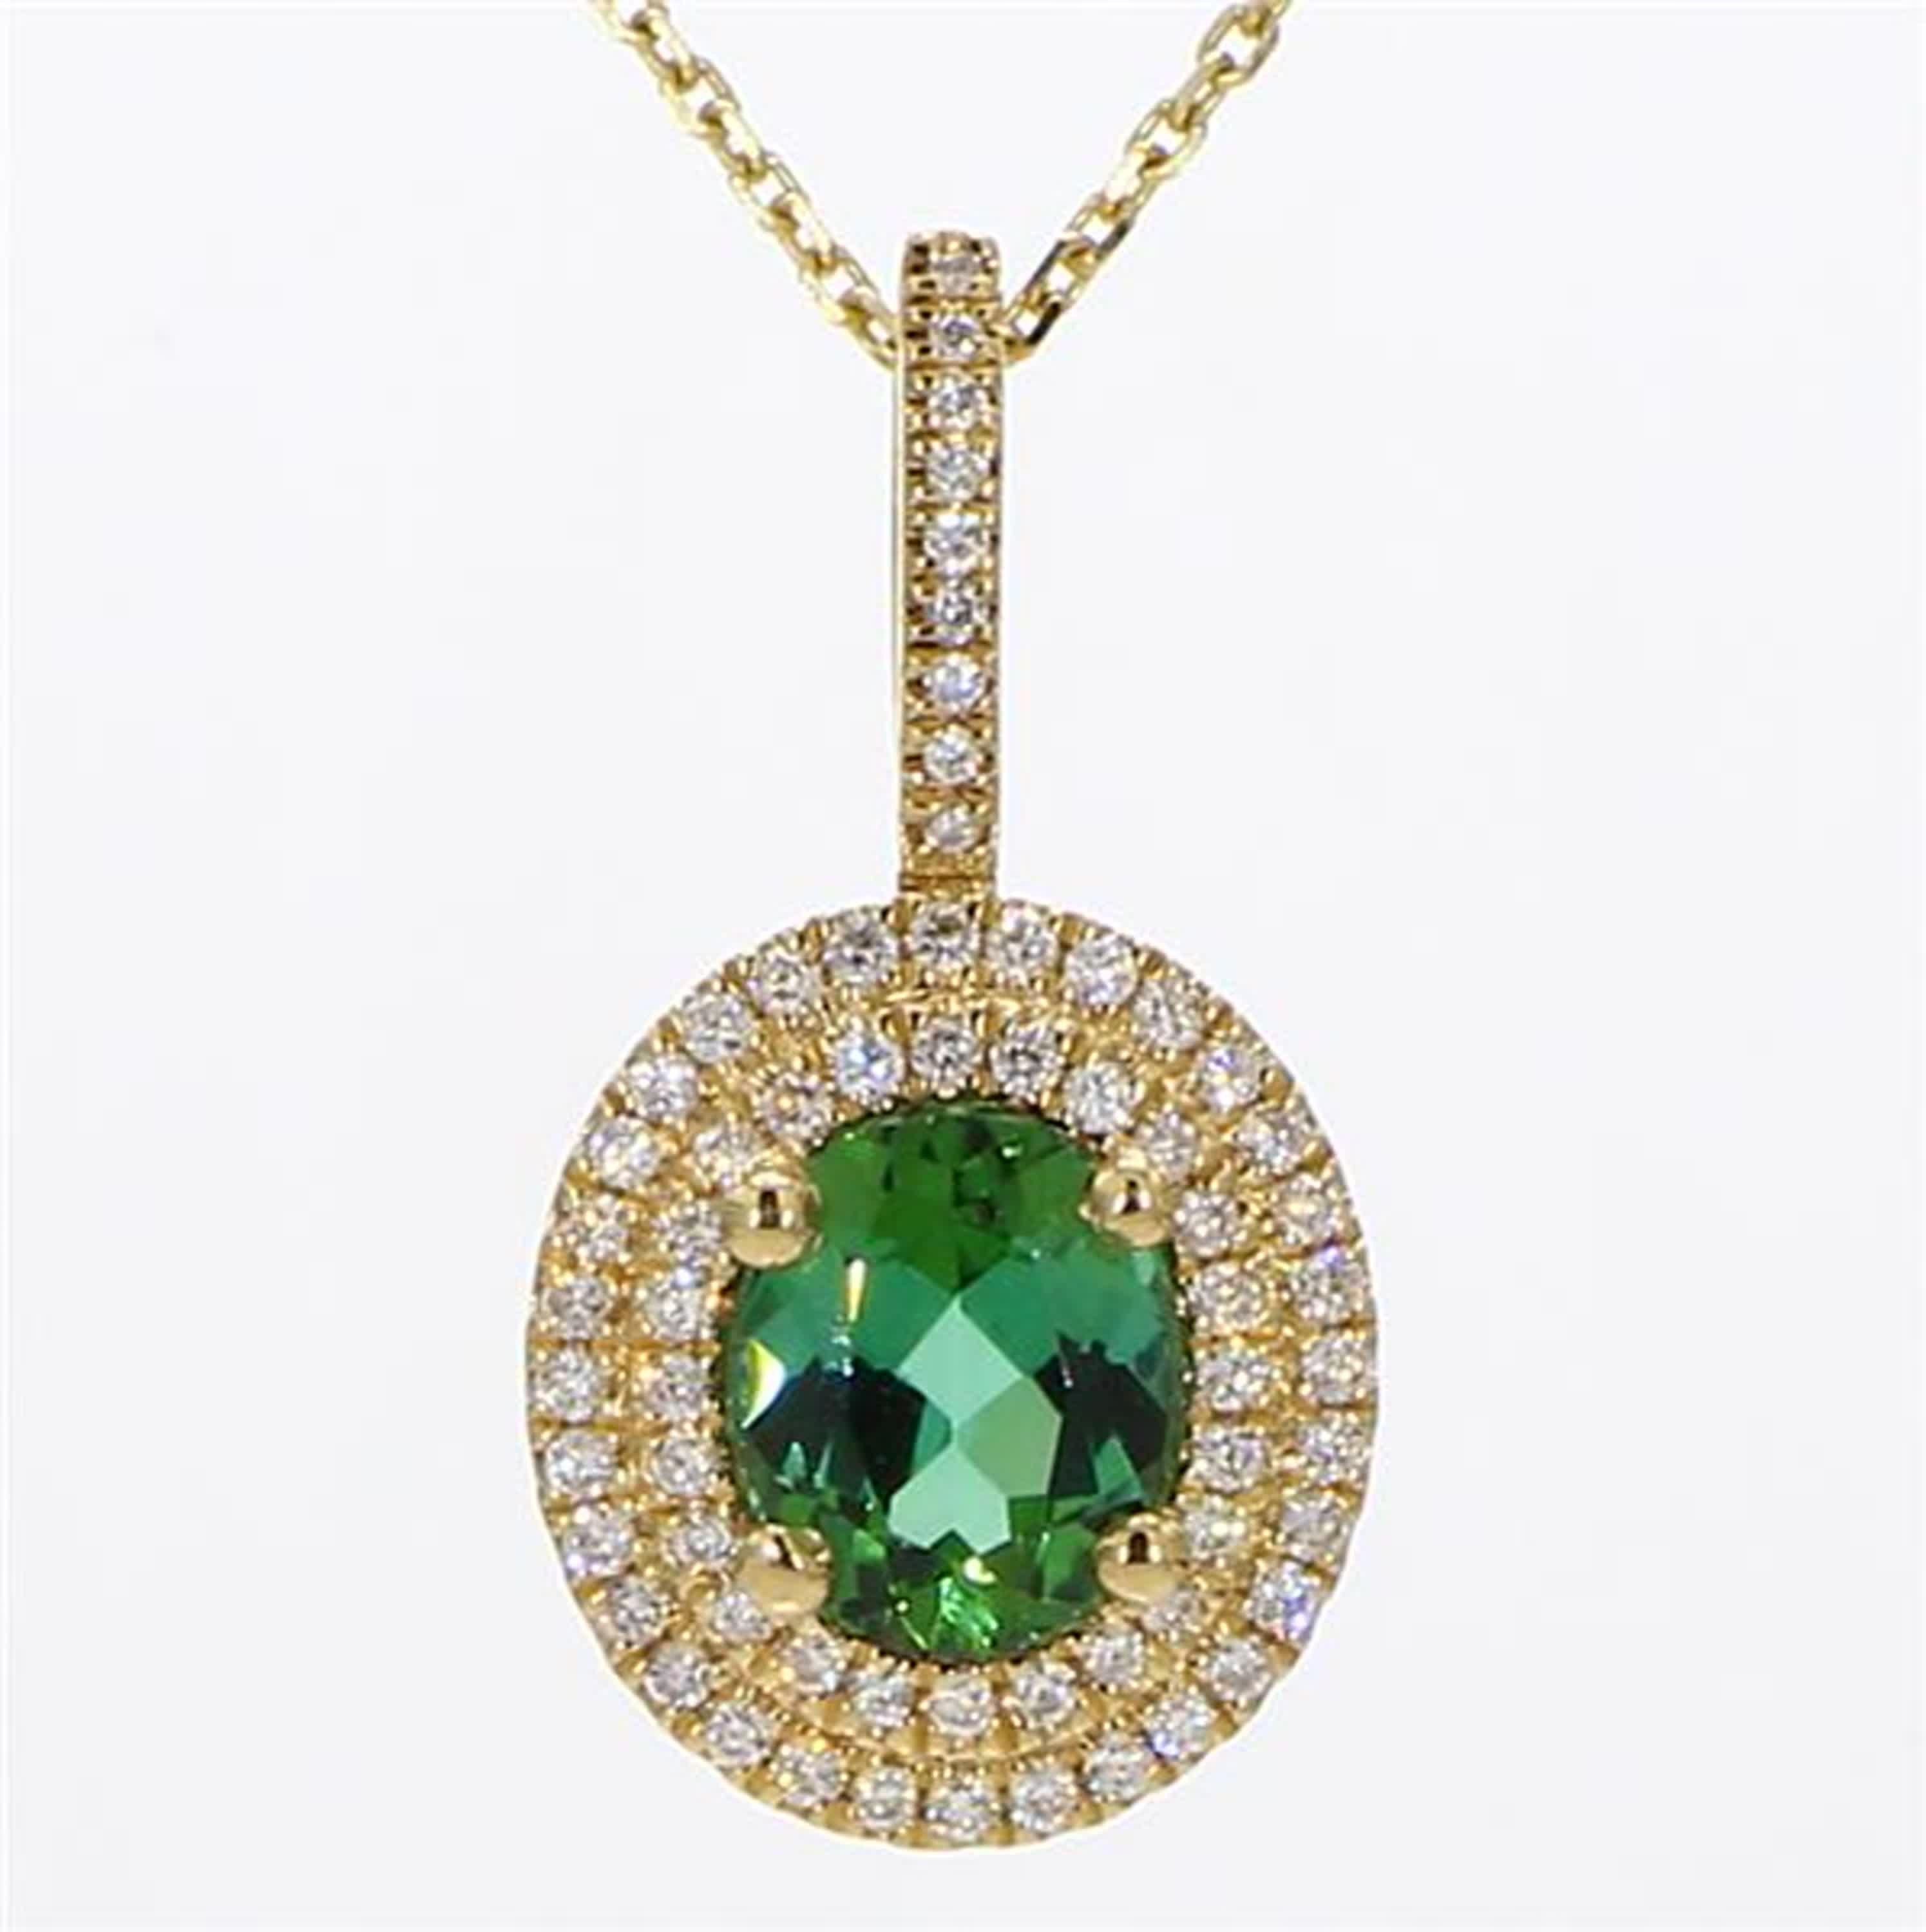 RareGemWorld's intriguing tourmaline pendant. Mounted in a beautiful 14K Yellow Gold setting with natural oval cut green tourmaline. The tourmaline is surrounded by natural round white diamond melee. This pendant is guaranteed to impress and enhance